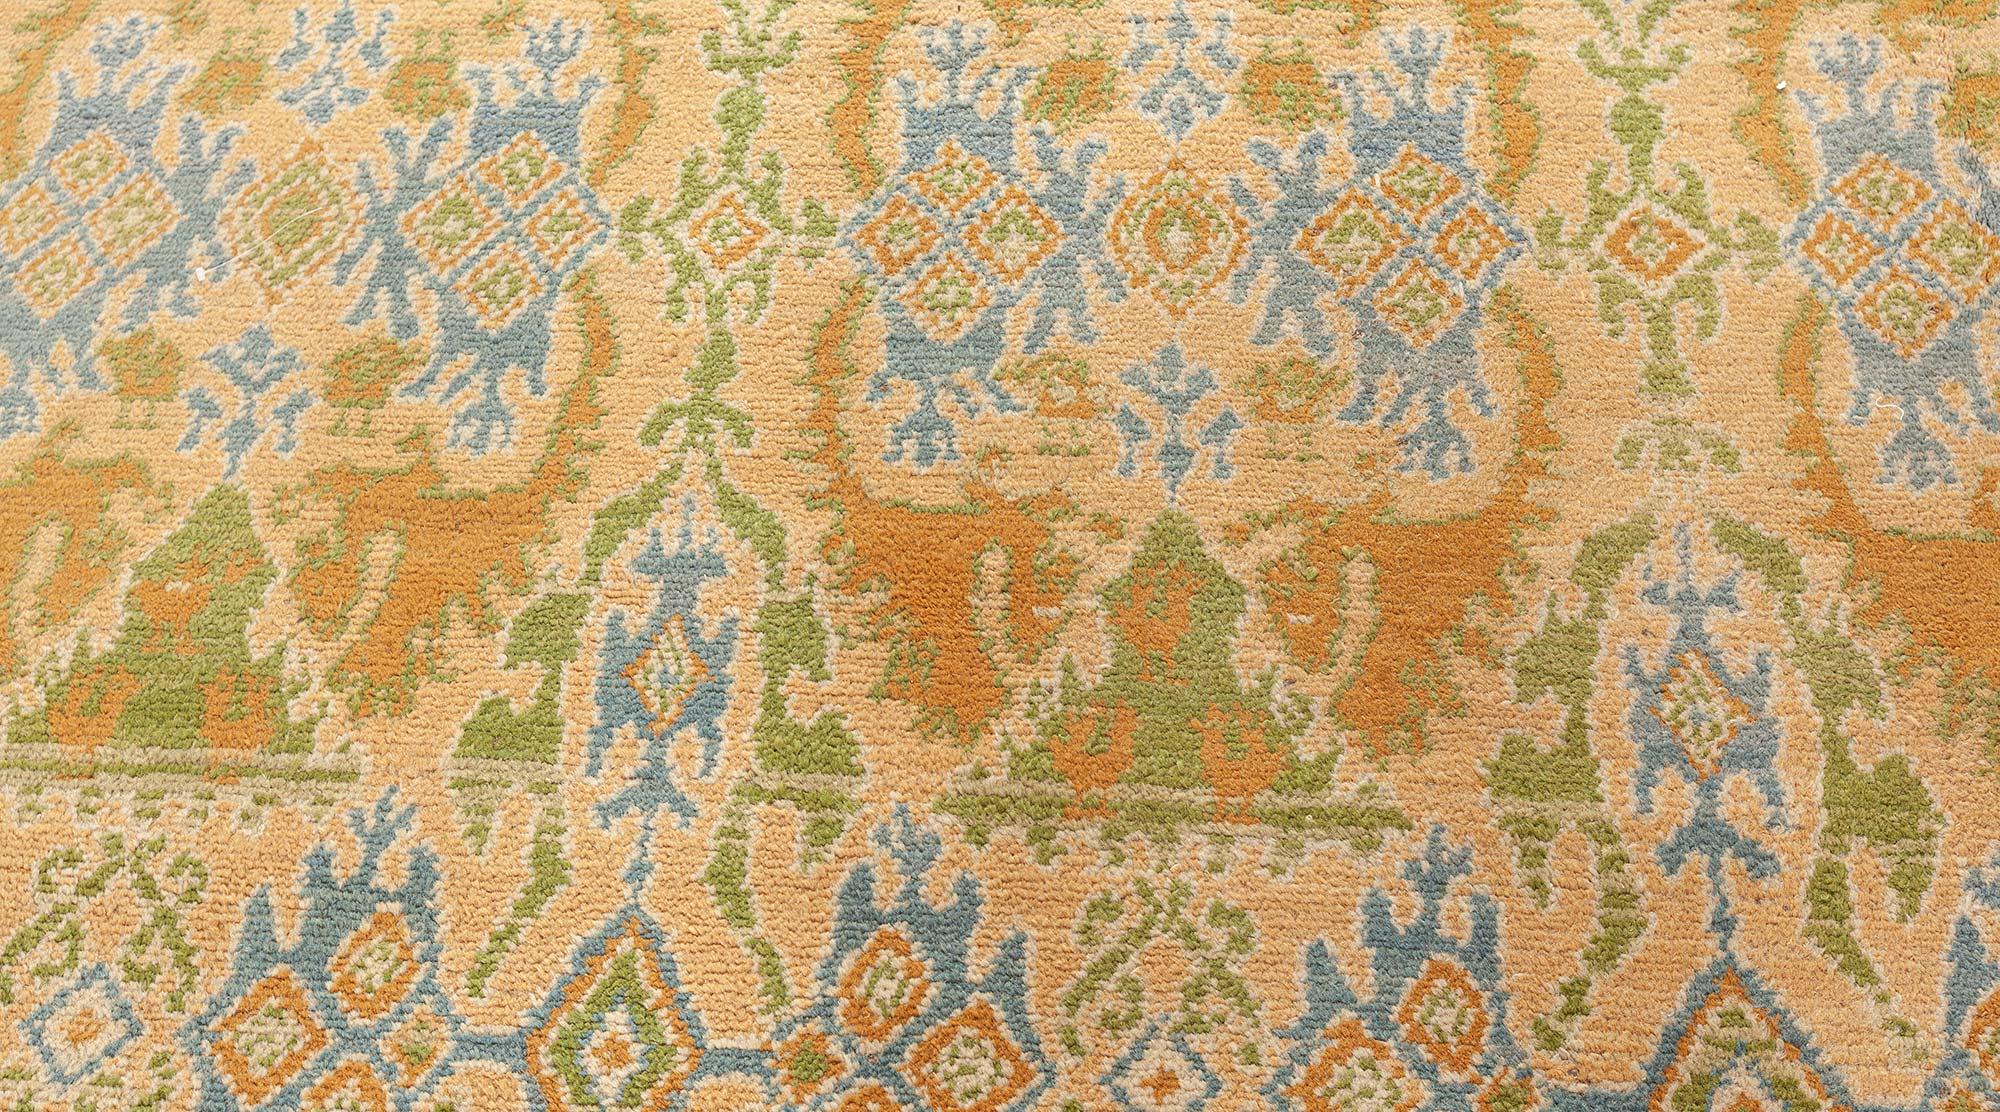 Vintage Spanish Rug in Yellow, Blue and Green
Size: 14'0